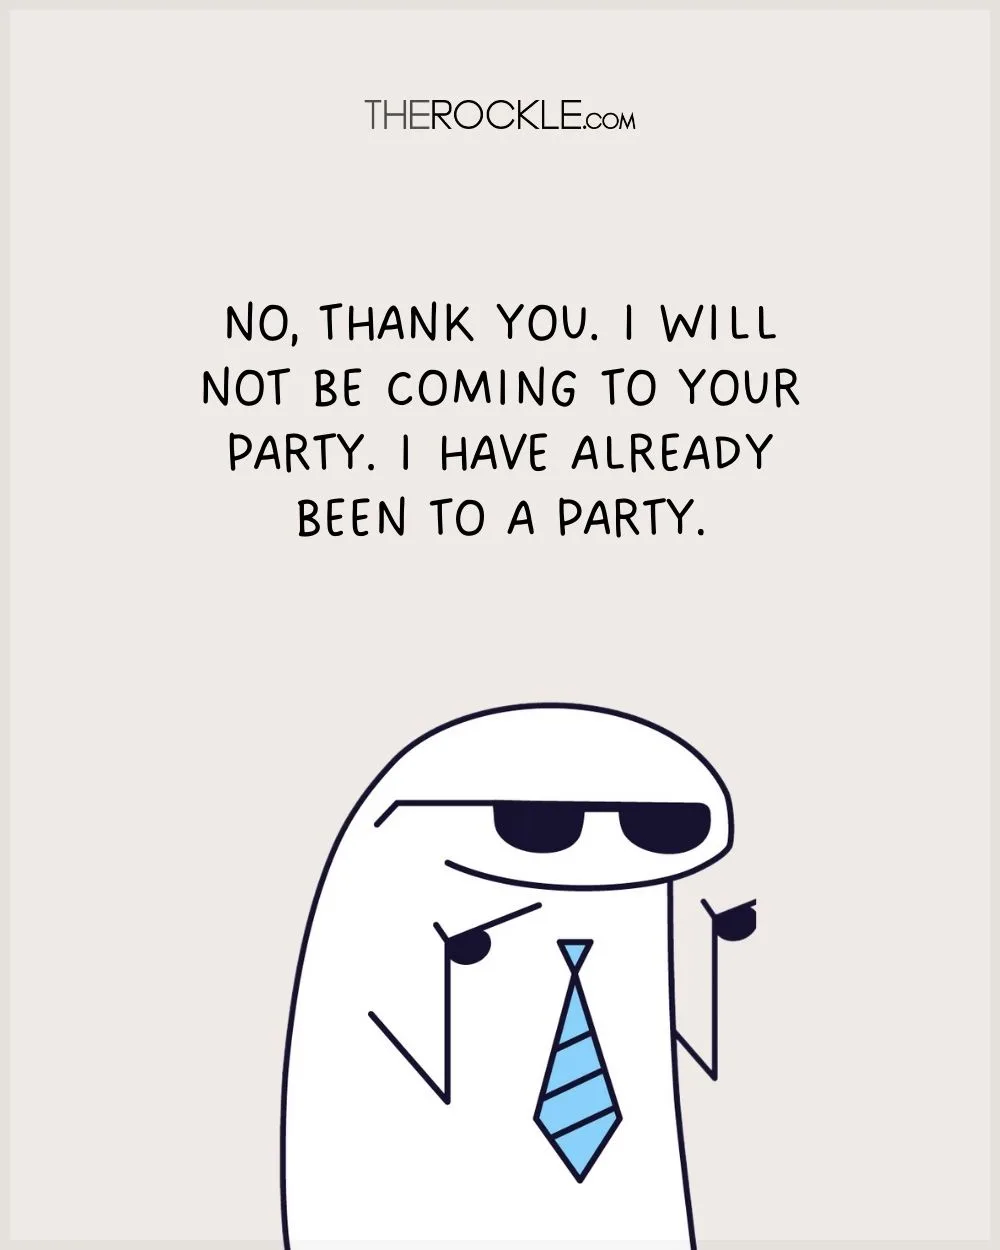 Funny quote about introverts avoiding parties